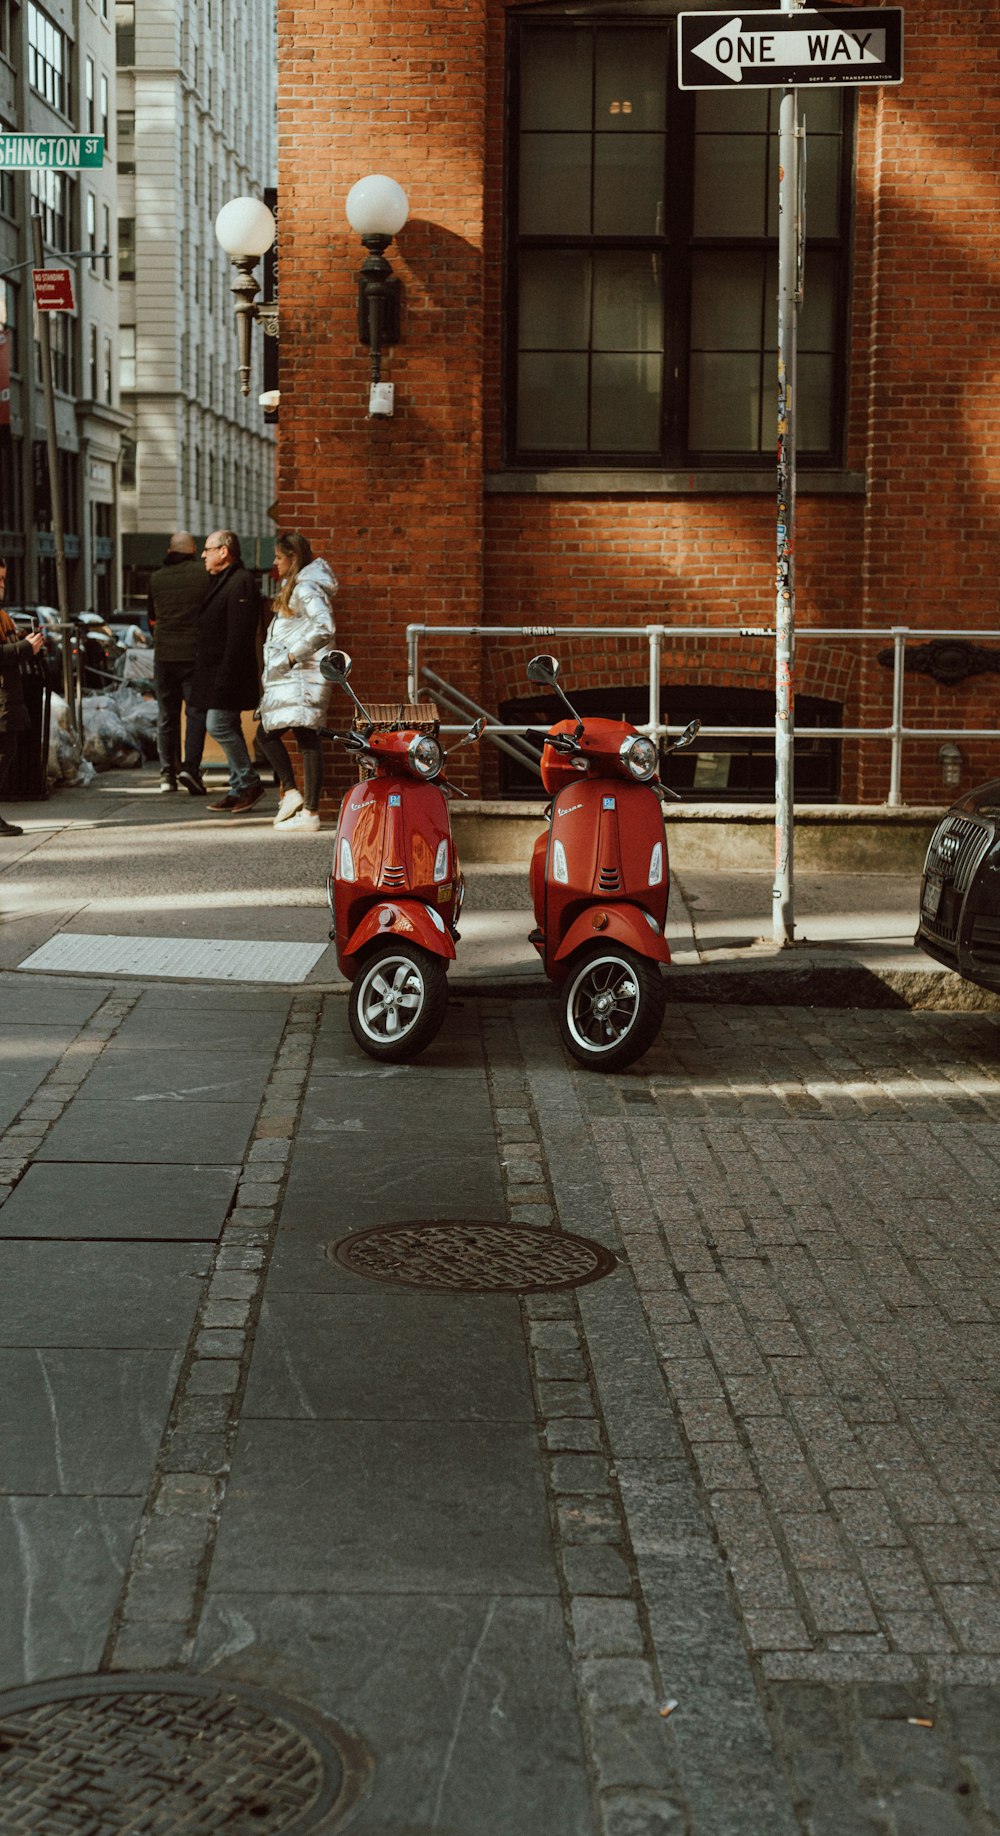 2 men riding red motor scooter on road during daytime